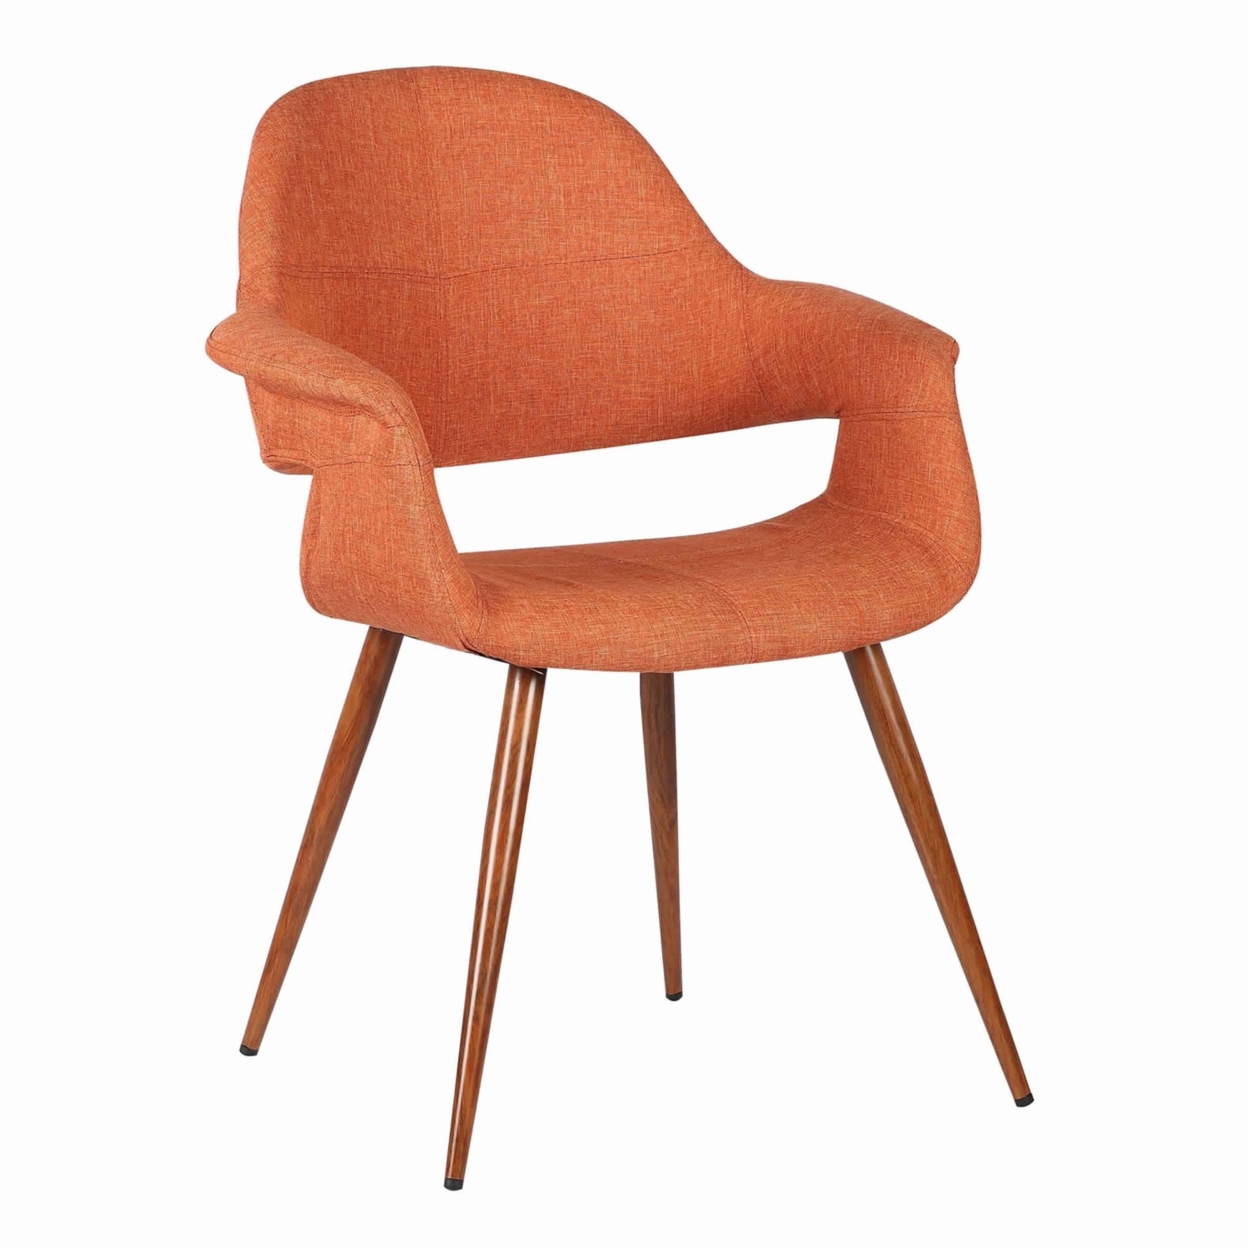 Fabric Mid Century Dining Chair With Round Tapered Legs, Orange And Brown- Saltoro Sherpi